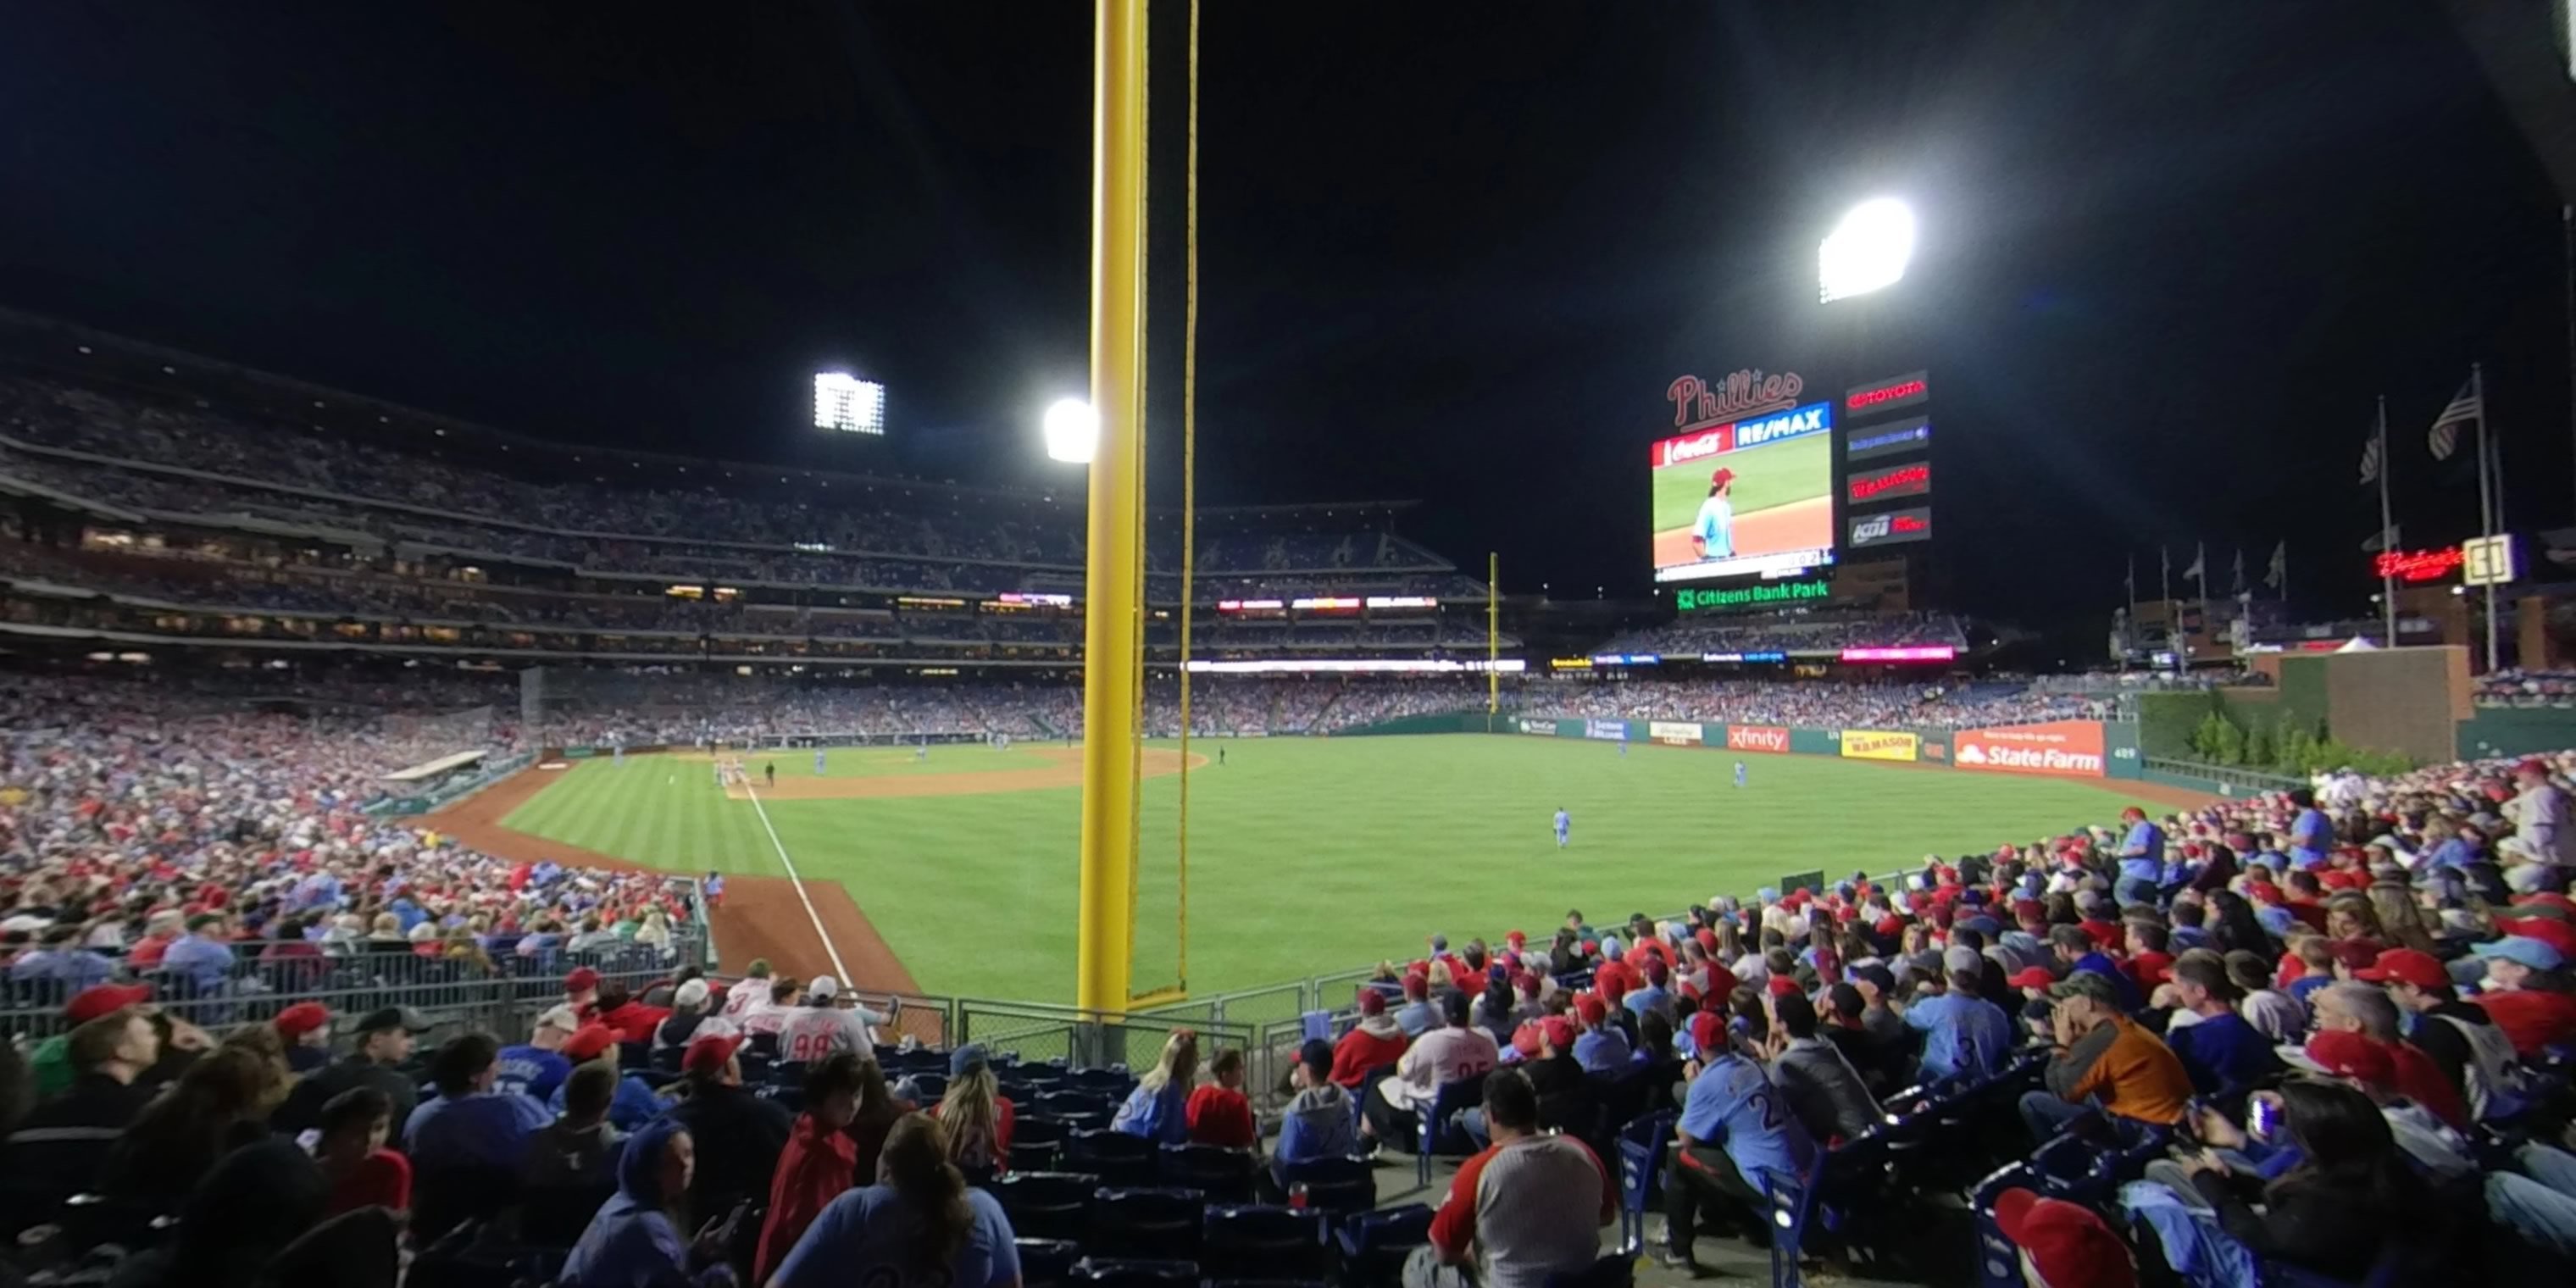 section 106 panoramic seat view  for baseball - citizens bank park